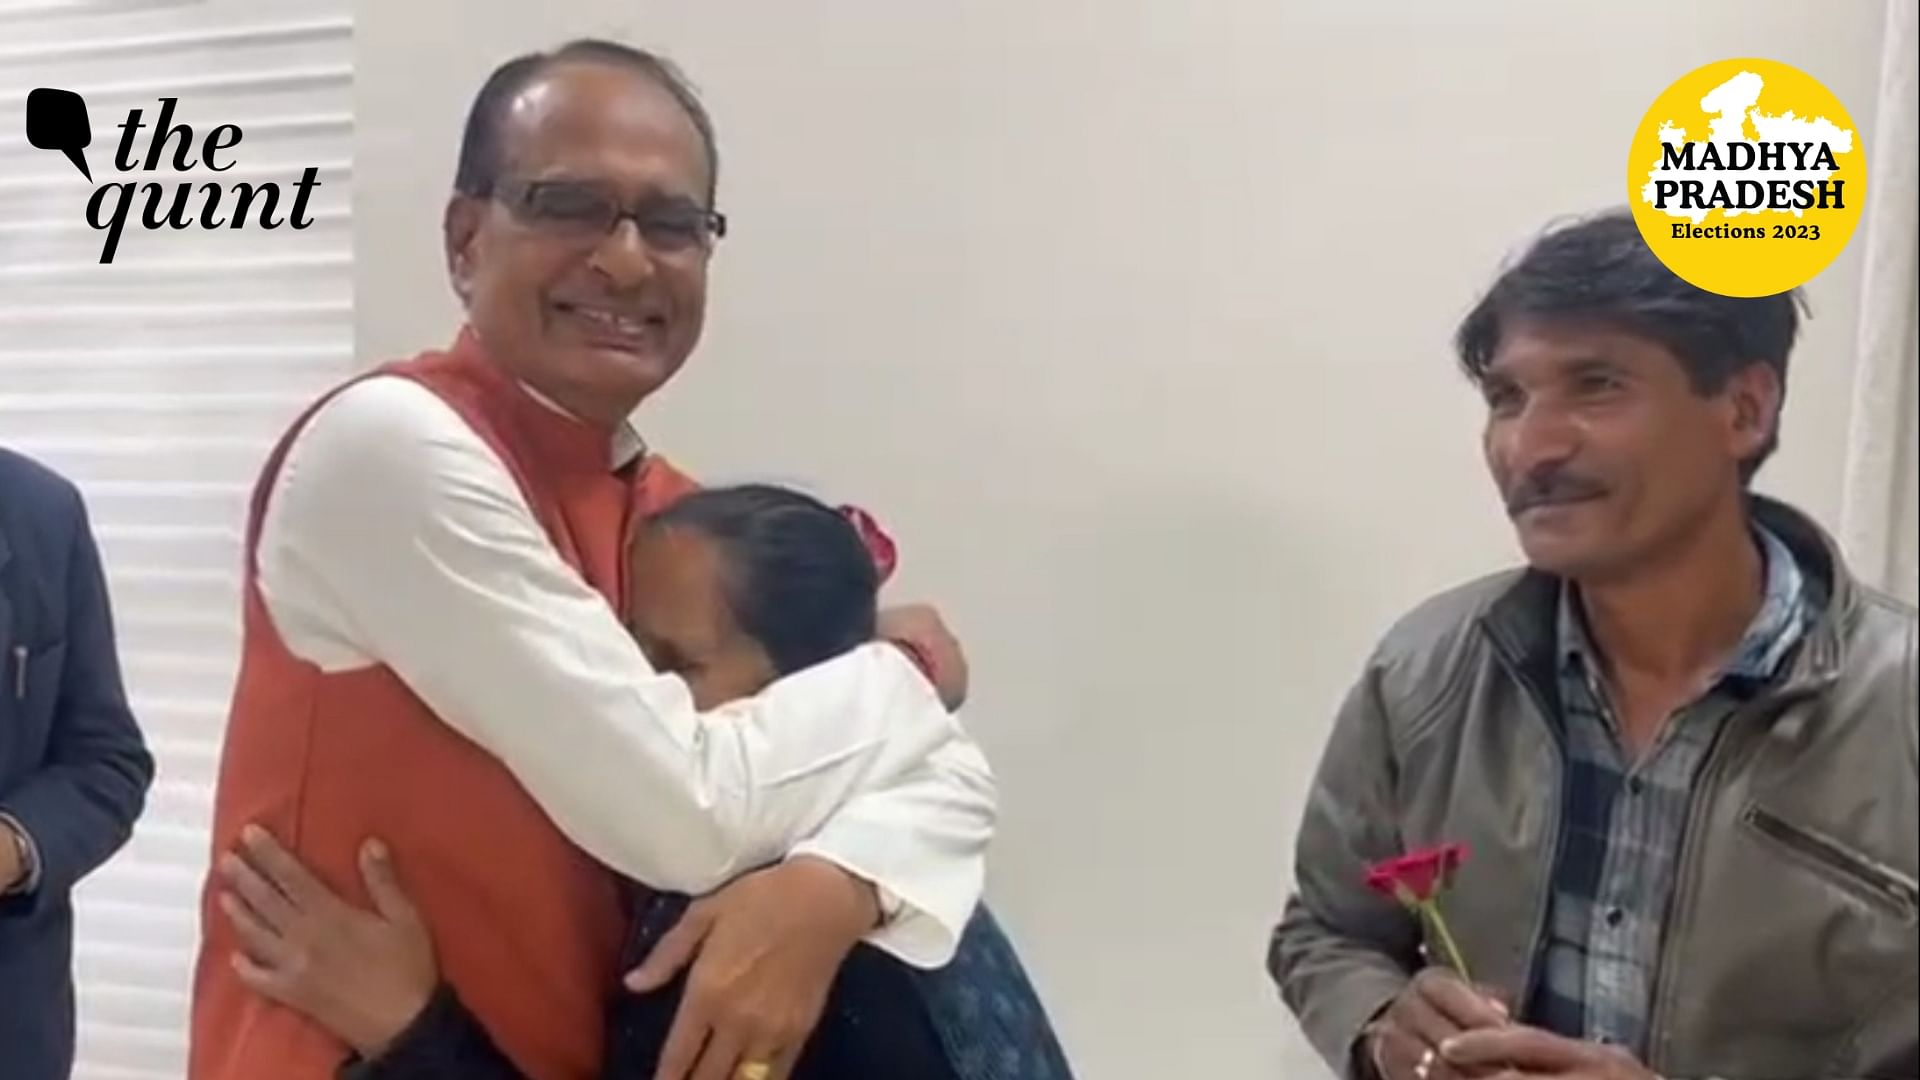 <div class="paragraphs"><p>The results of Madhya Pradesh assembly elections 2023 on 3 December 2023 painted a picture less expected by political analysts and much anticipated by the incumbent <a href="https://www.thequint.com/topic/shivraj-singh-chouhan">CM Shivraj Singh Chouhan</a> who fought on multiple fronts including within his party and has once again proved his connection with the voters.</p></div>